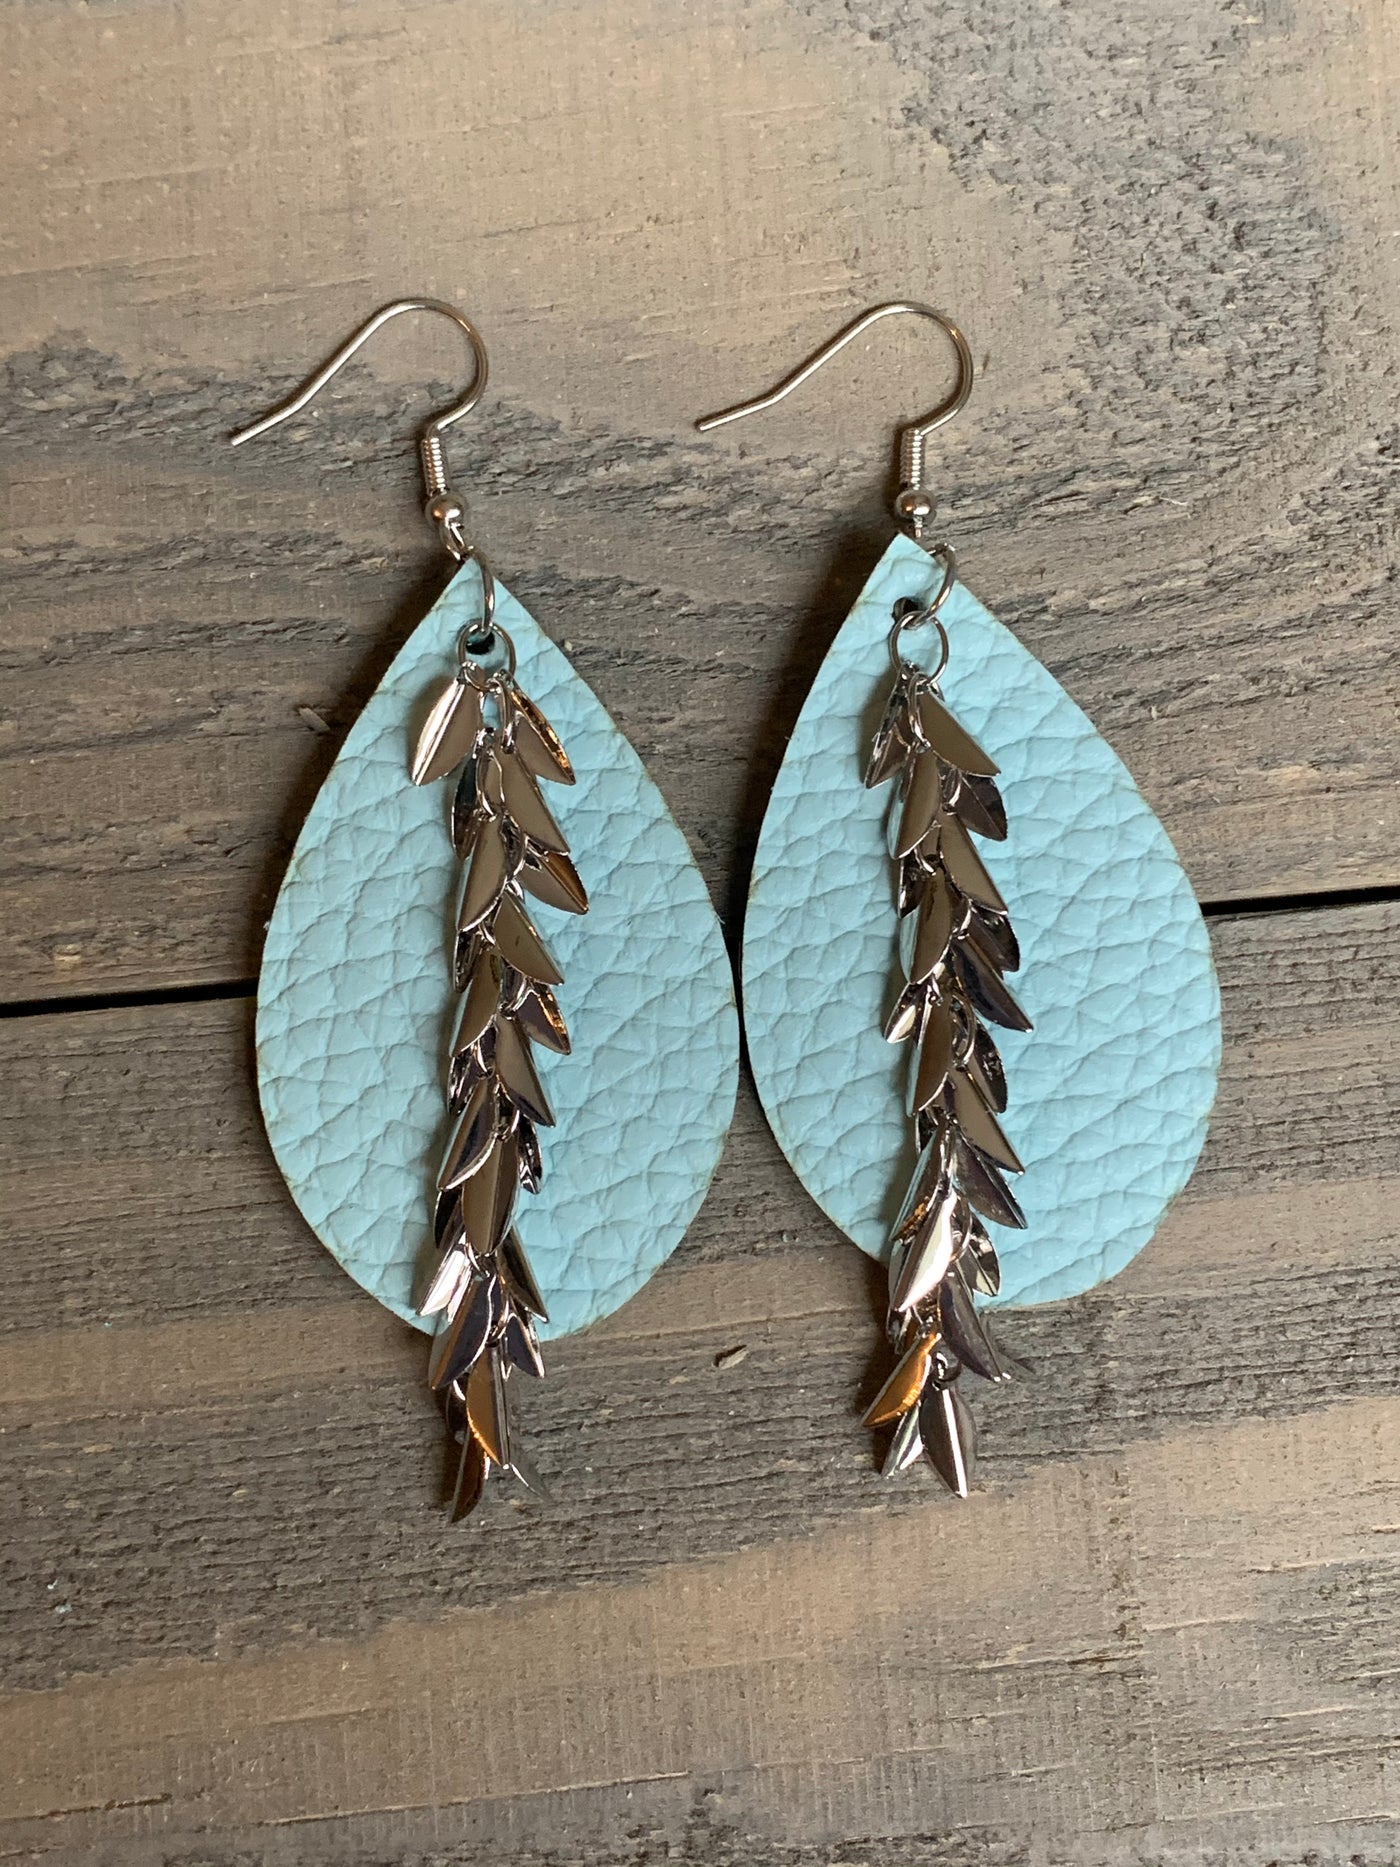 Baby Blue Leather Earrings with Silver Leaf Chain - Jill's Jewels | Unique, Handcrafted, Trendy, And Fun Jewelry